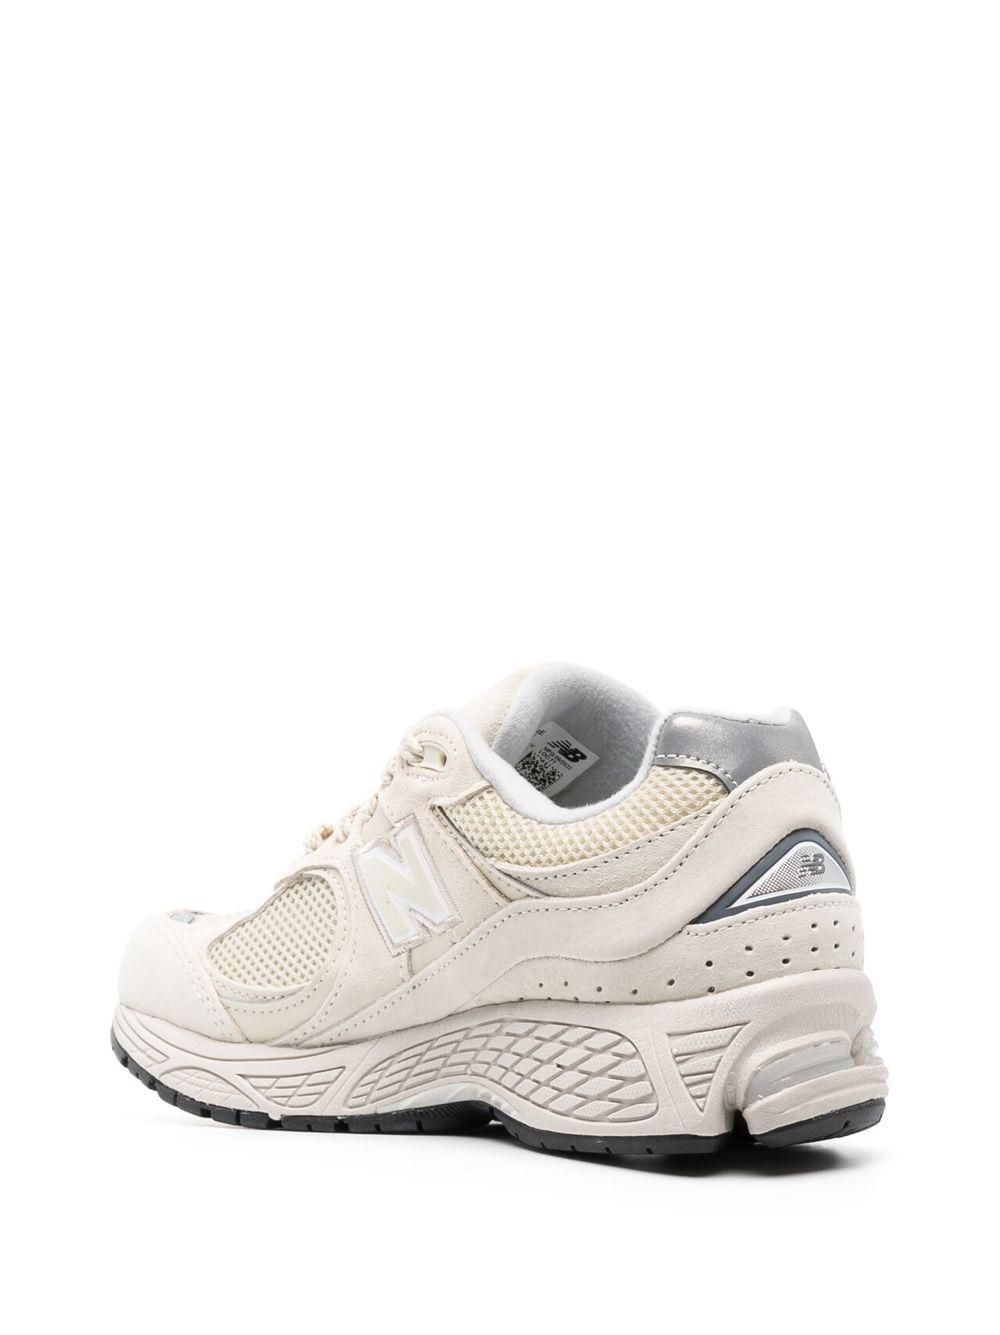 New Balance 2002r Sneakers in White | Lyst